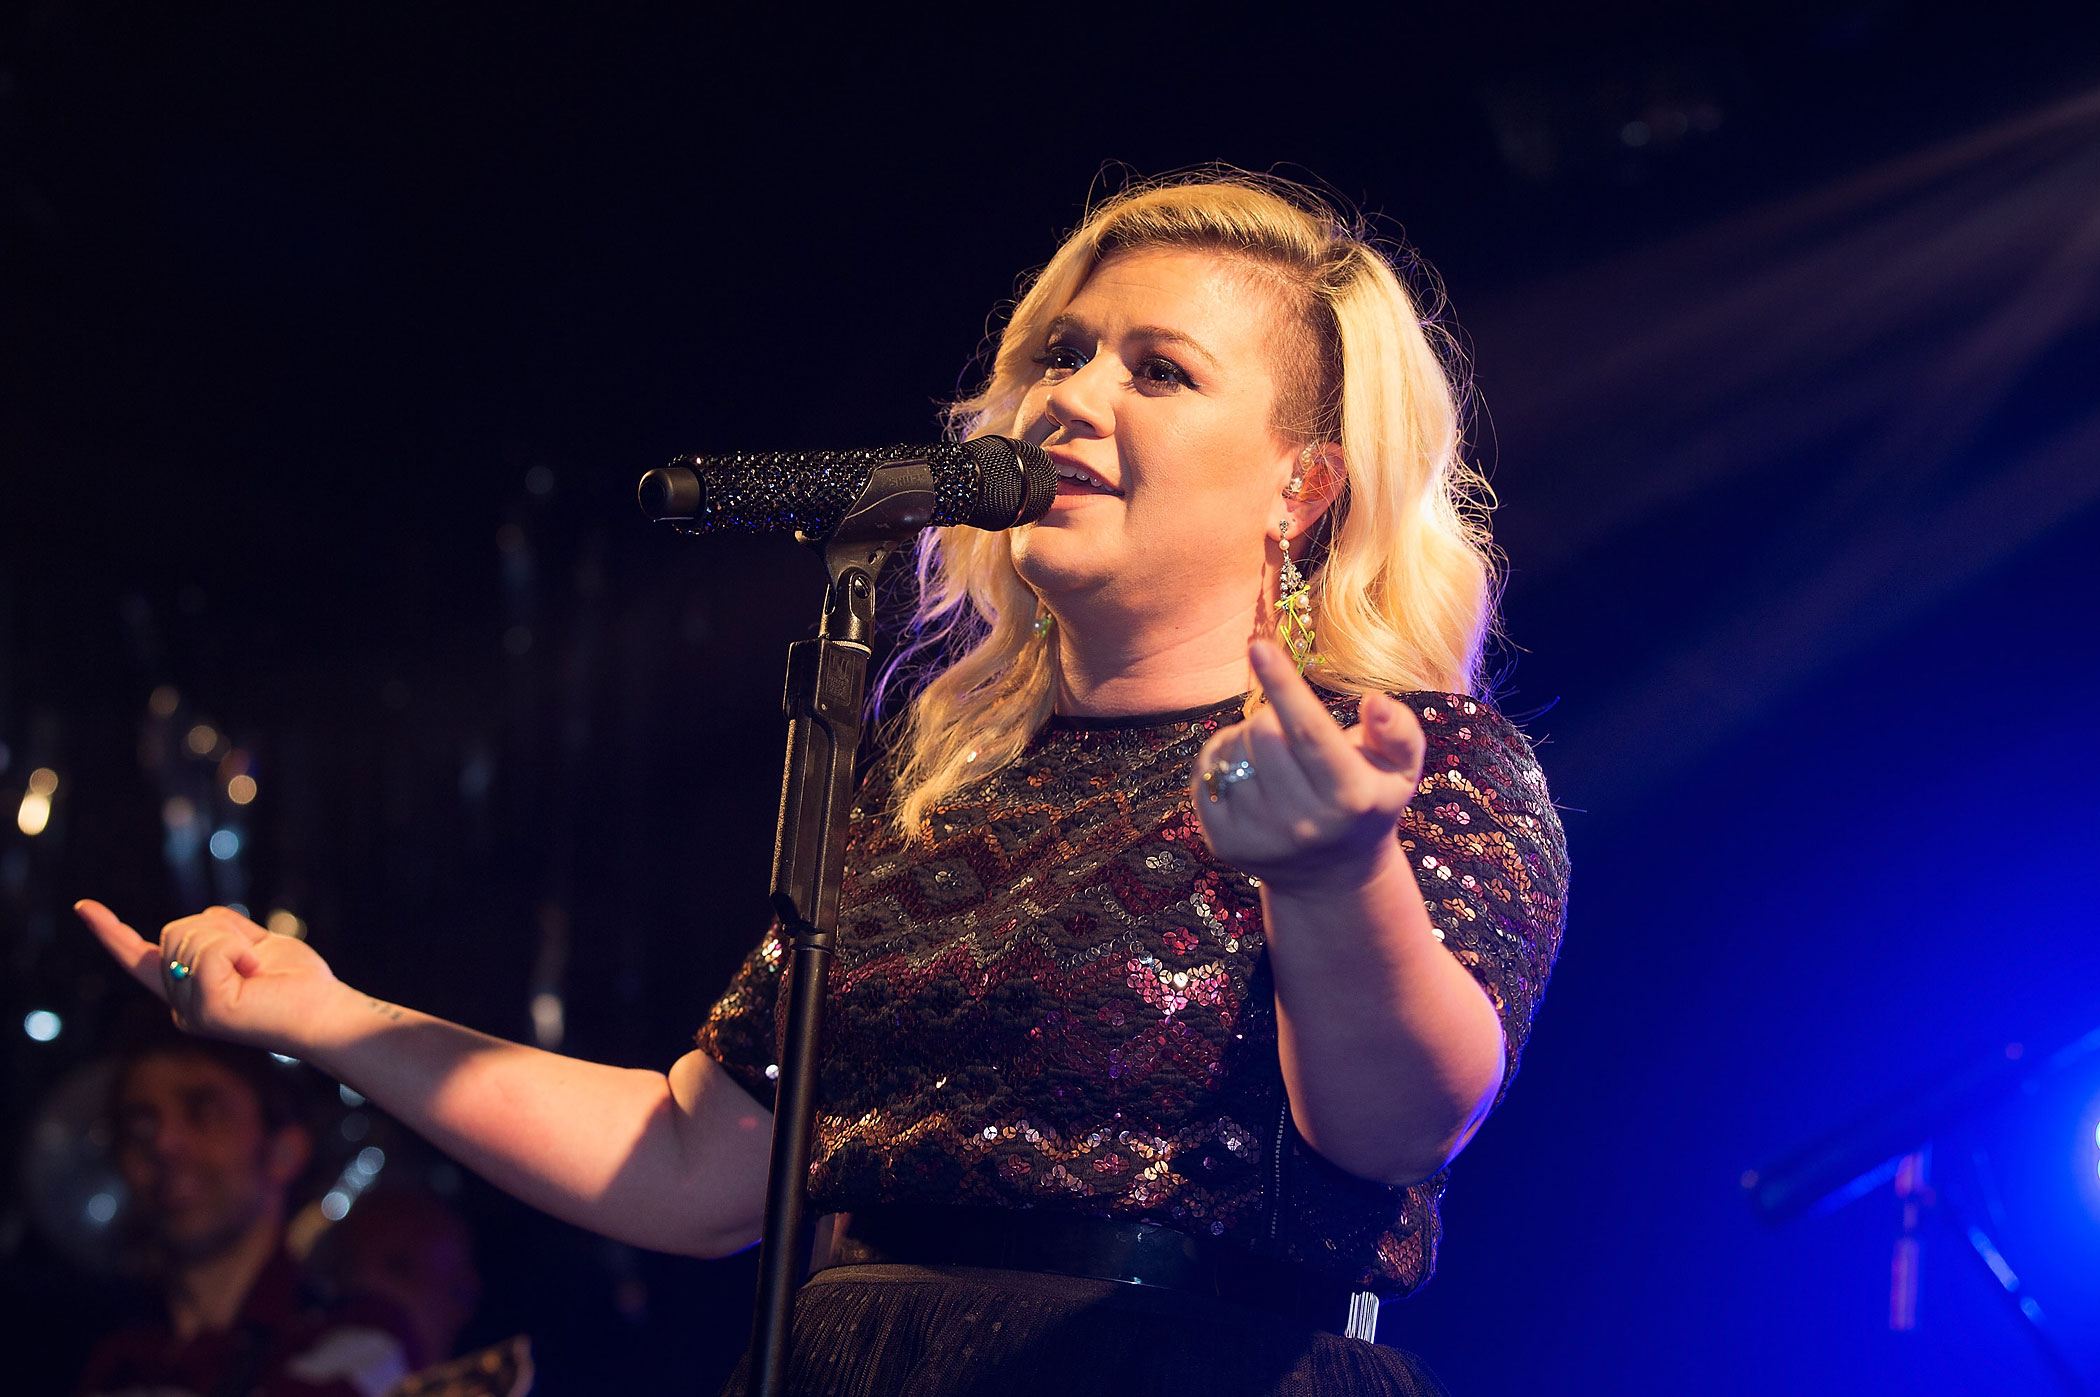 Kelly Clarkson performs on stage at G-A-Y on Feb. 14, 2015 in London, England. (Jo Hale—Redferns/Getty Images)